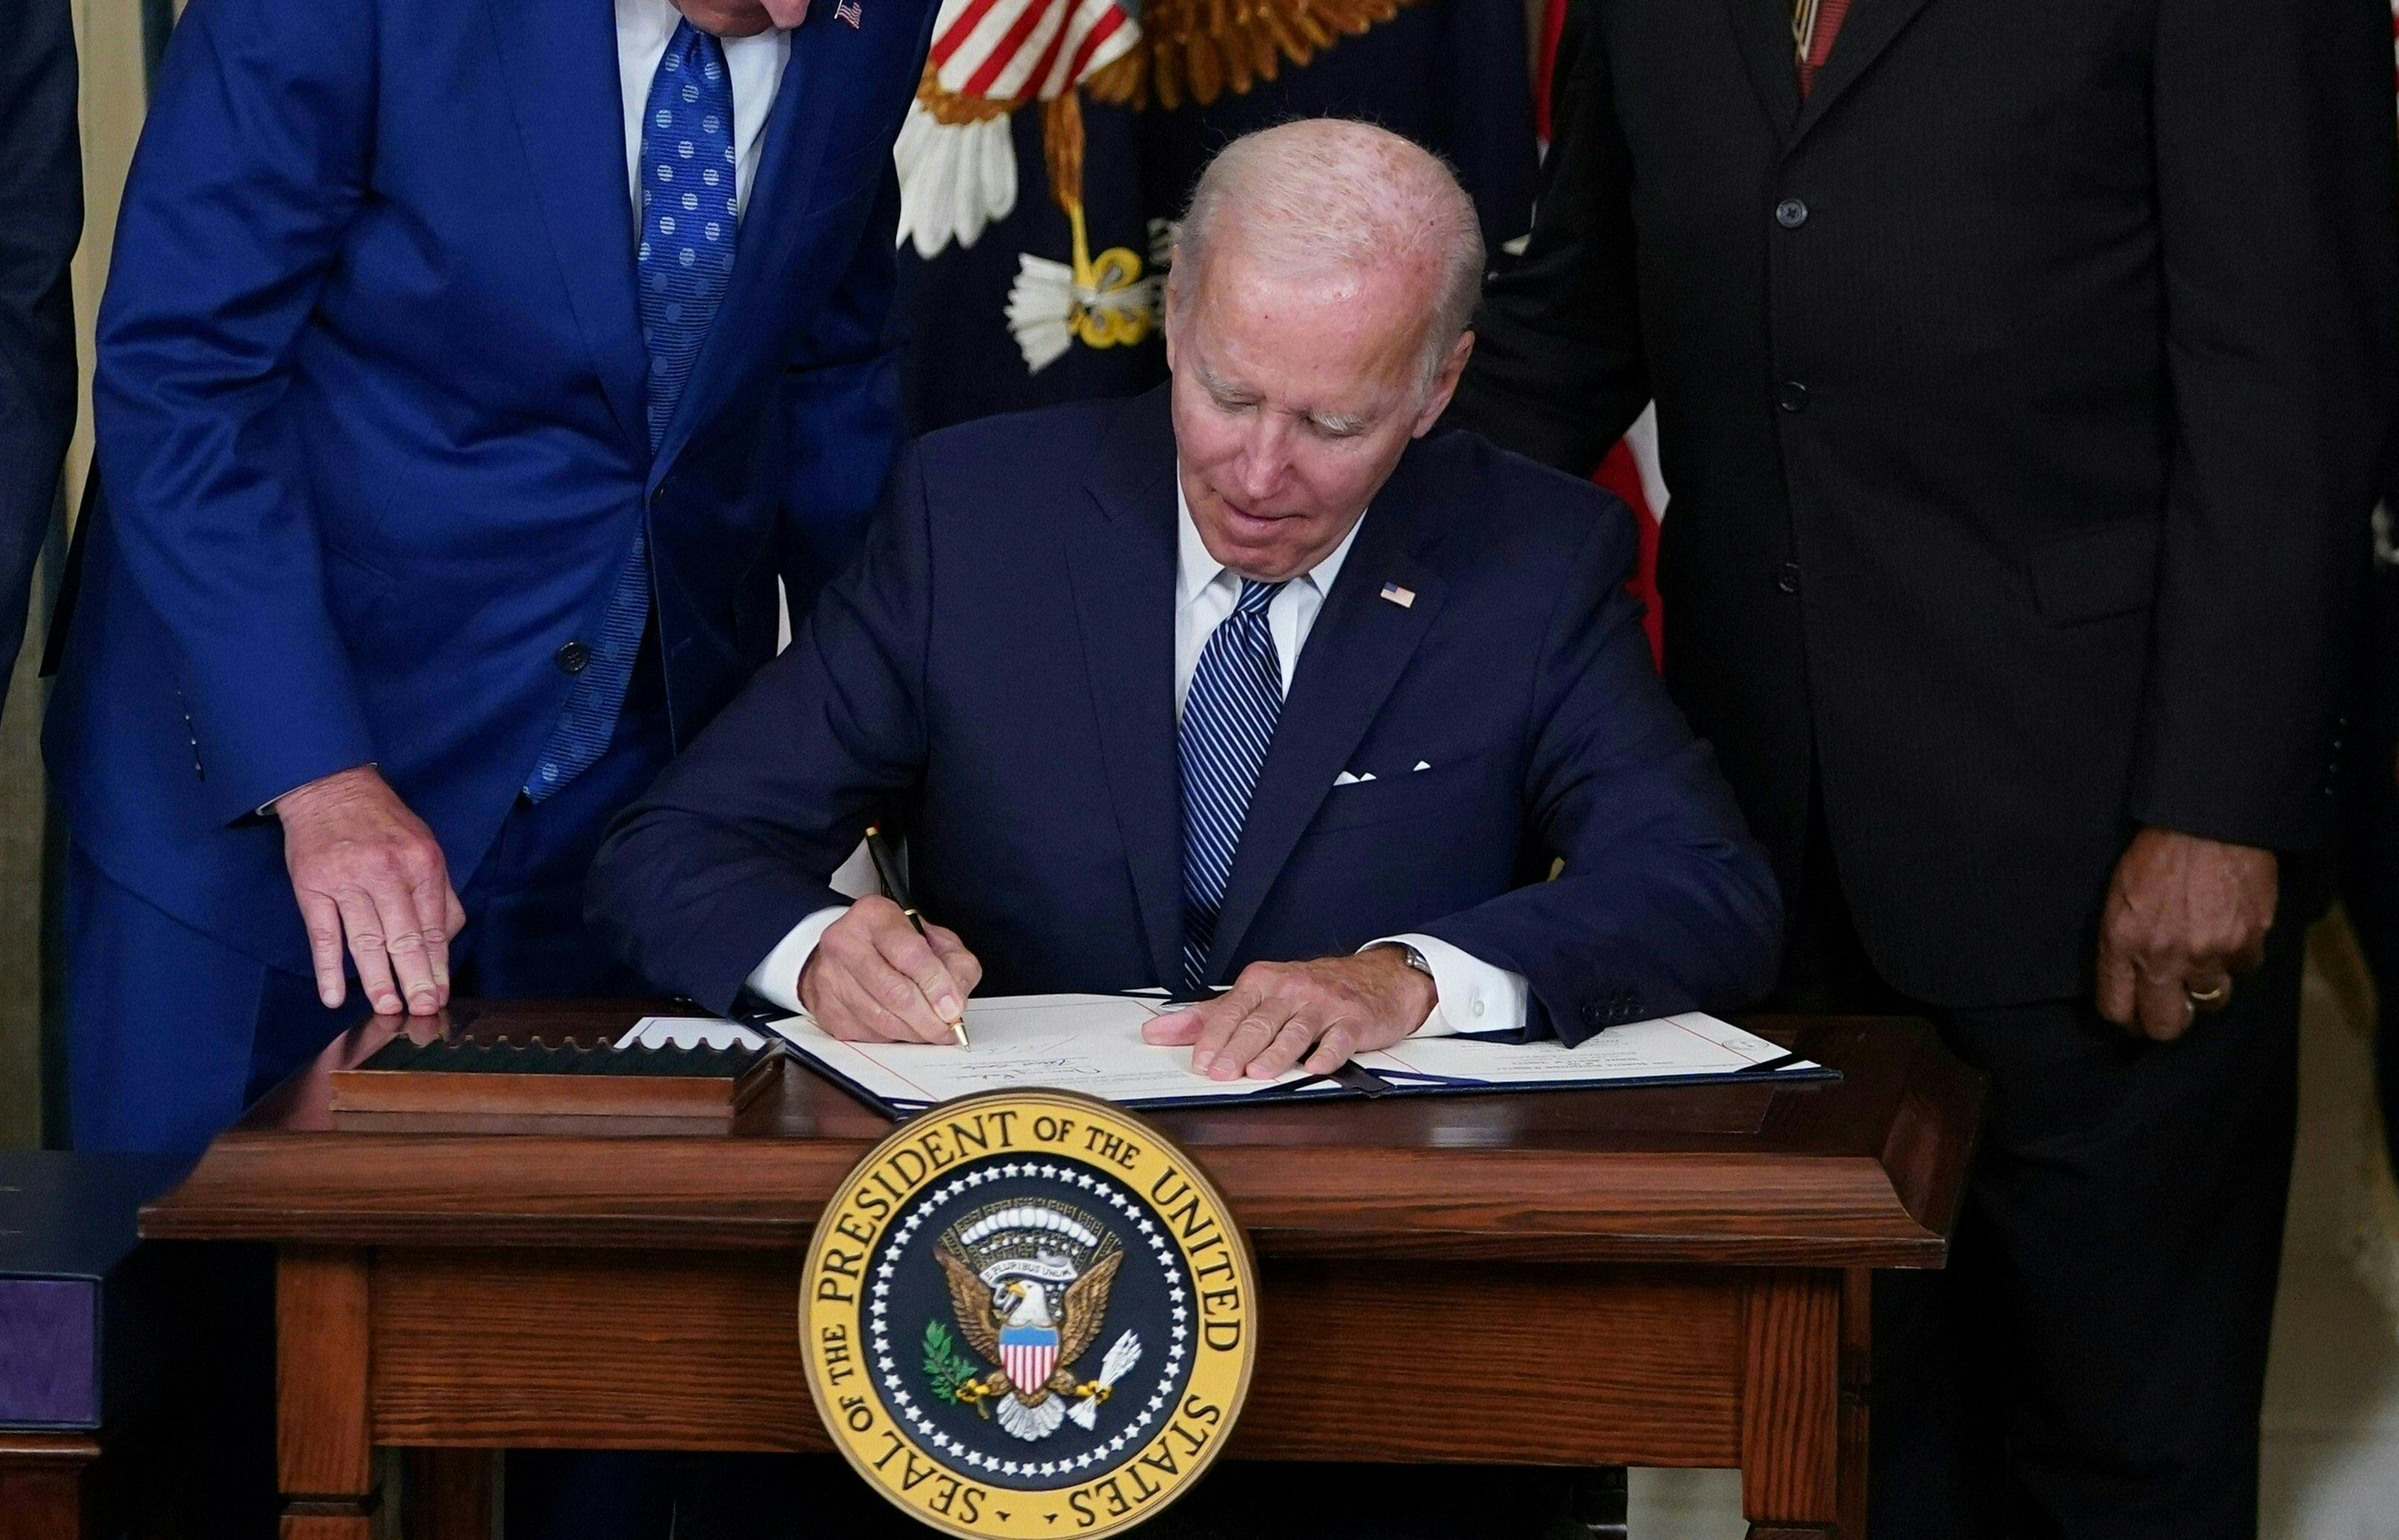 Biden sits at a desk with the presidential seal and signs a bill.